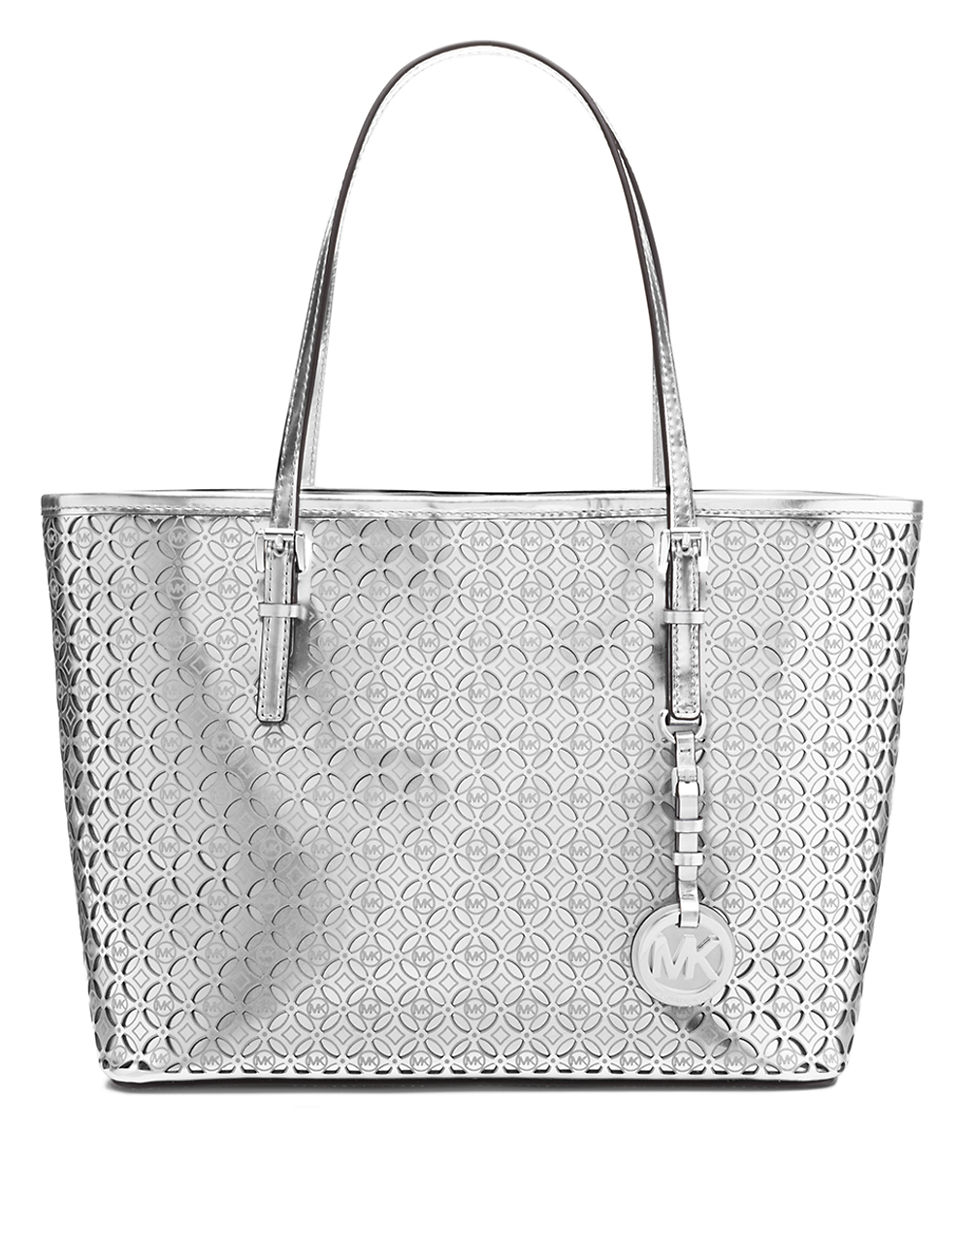 MICHAEL Michael Kors Perforated Leather Floral Small Travel Tote Bag in Metallic - Lyst